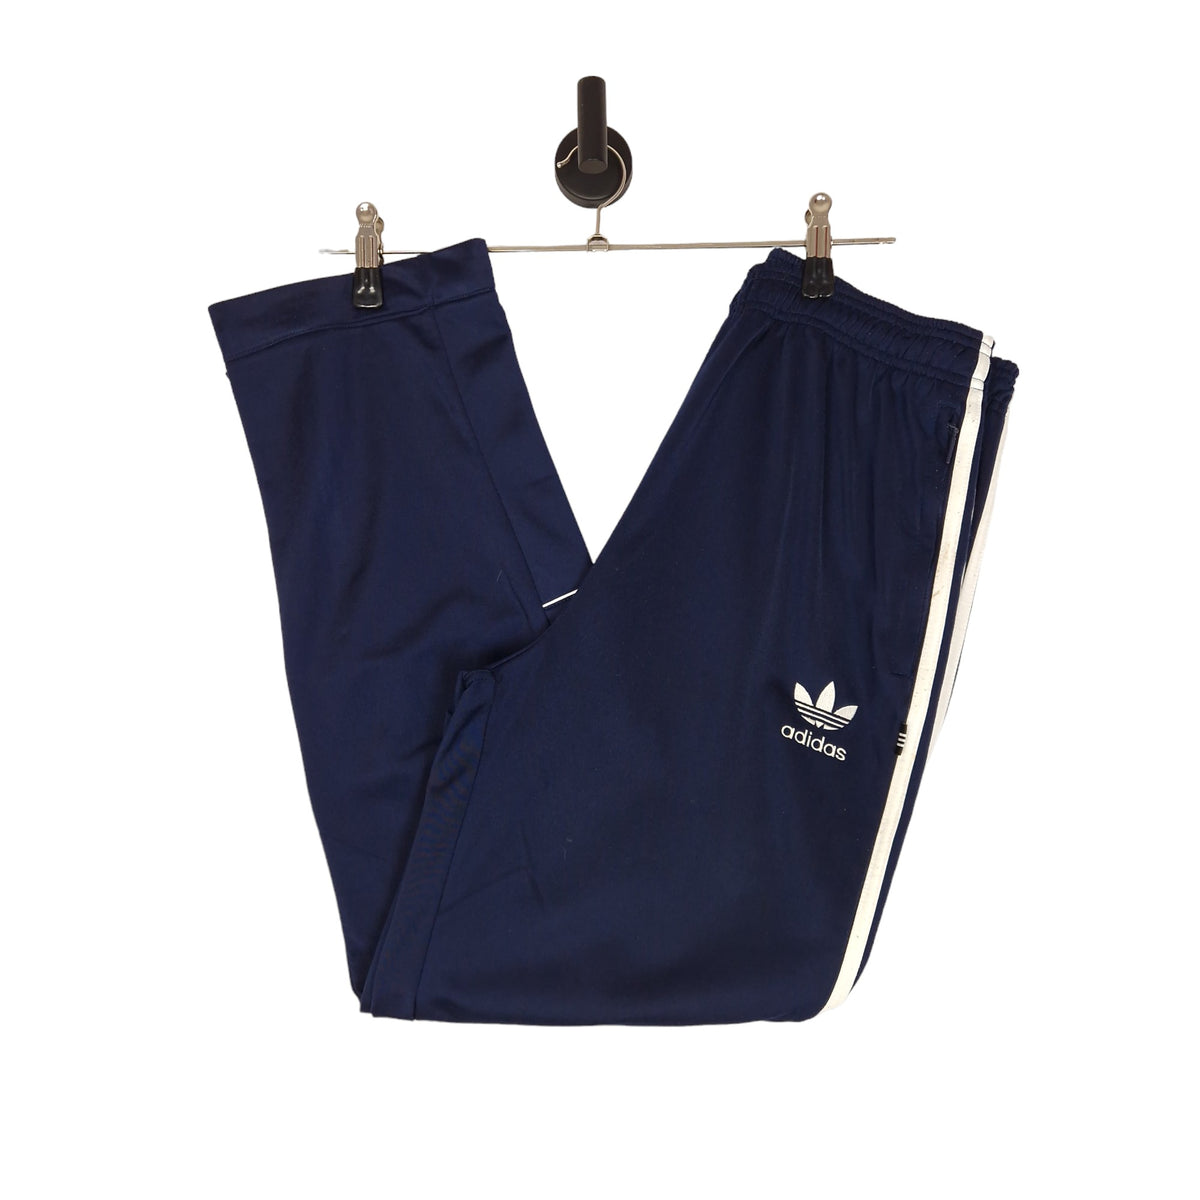 90's Adidas Jogging Bottoms - Size W34